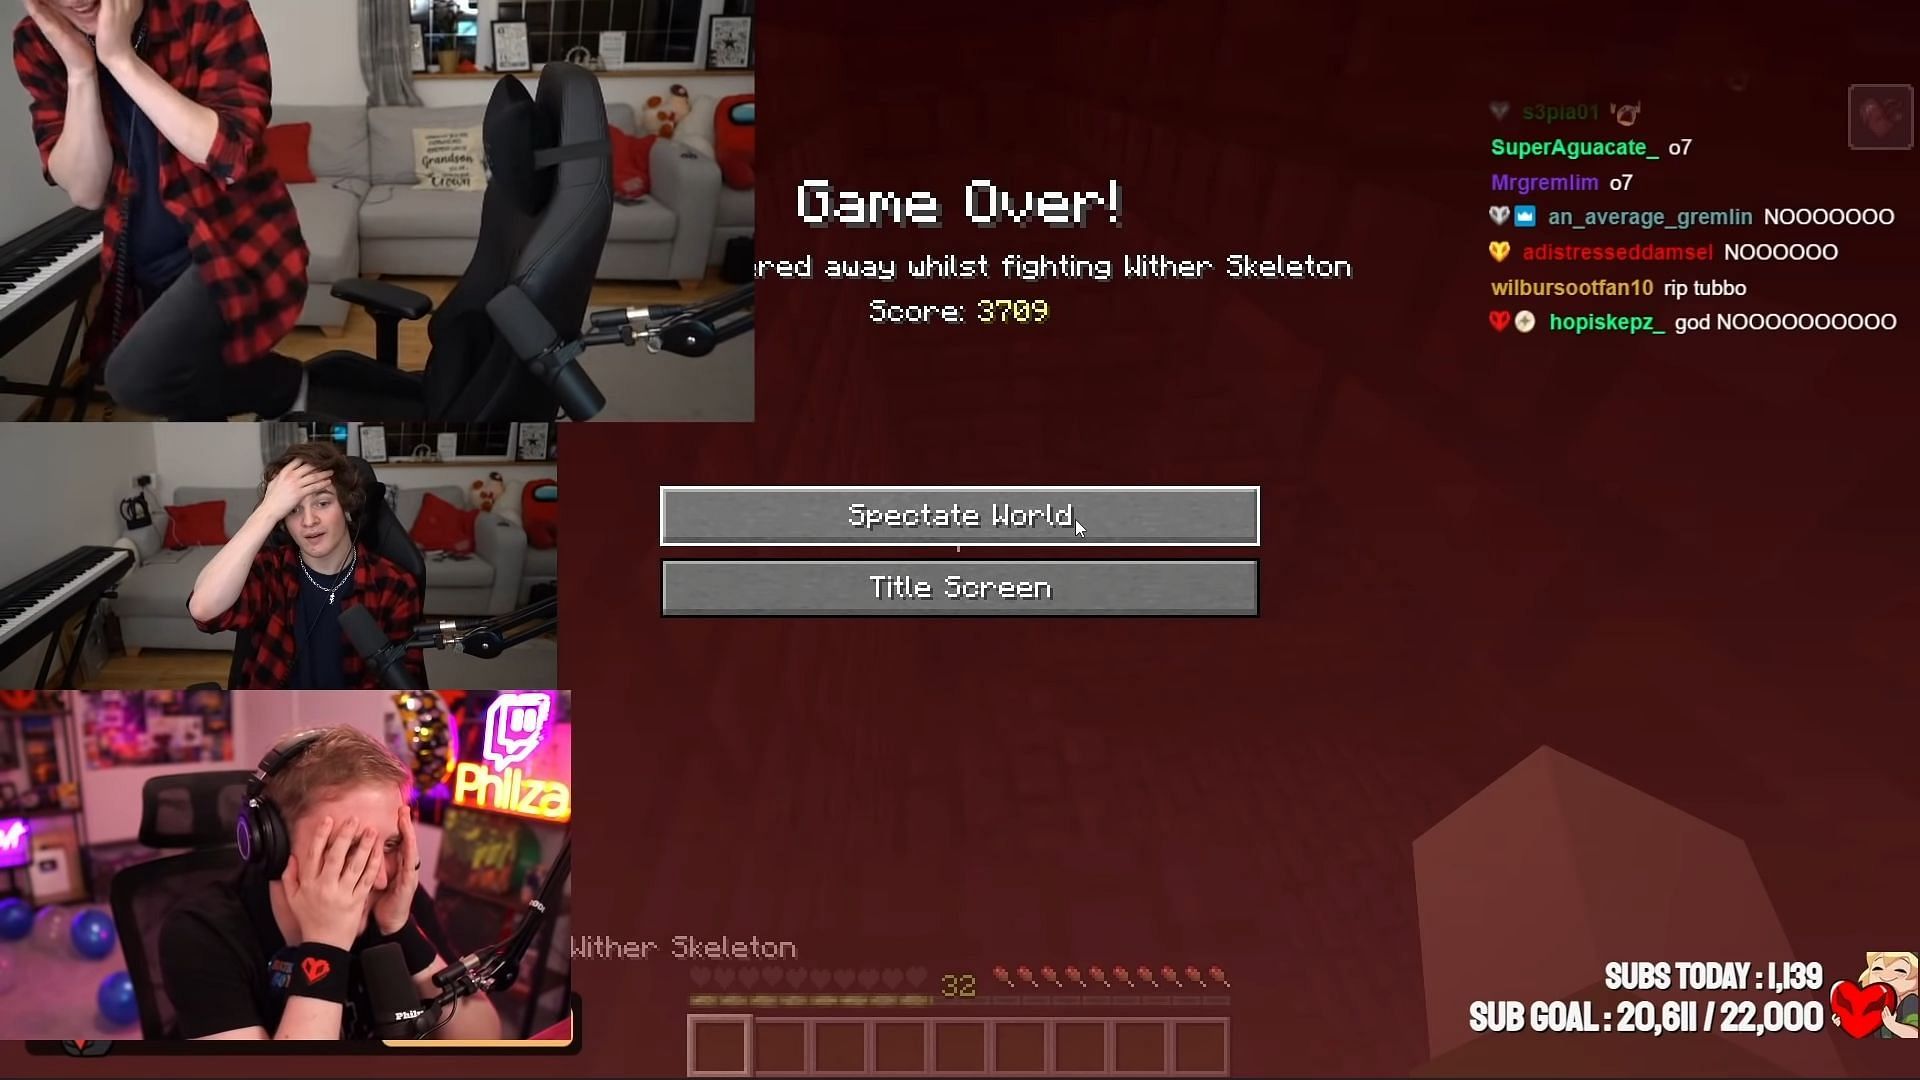 You are a legend - Minecraft streamer Tubbo's subathon ends after